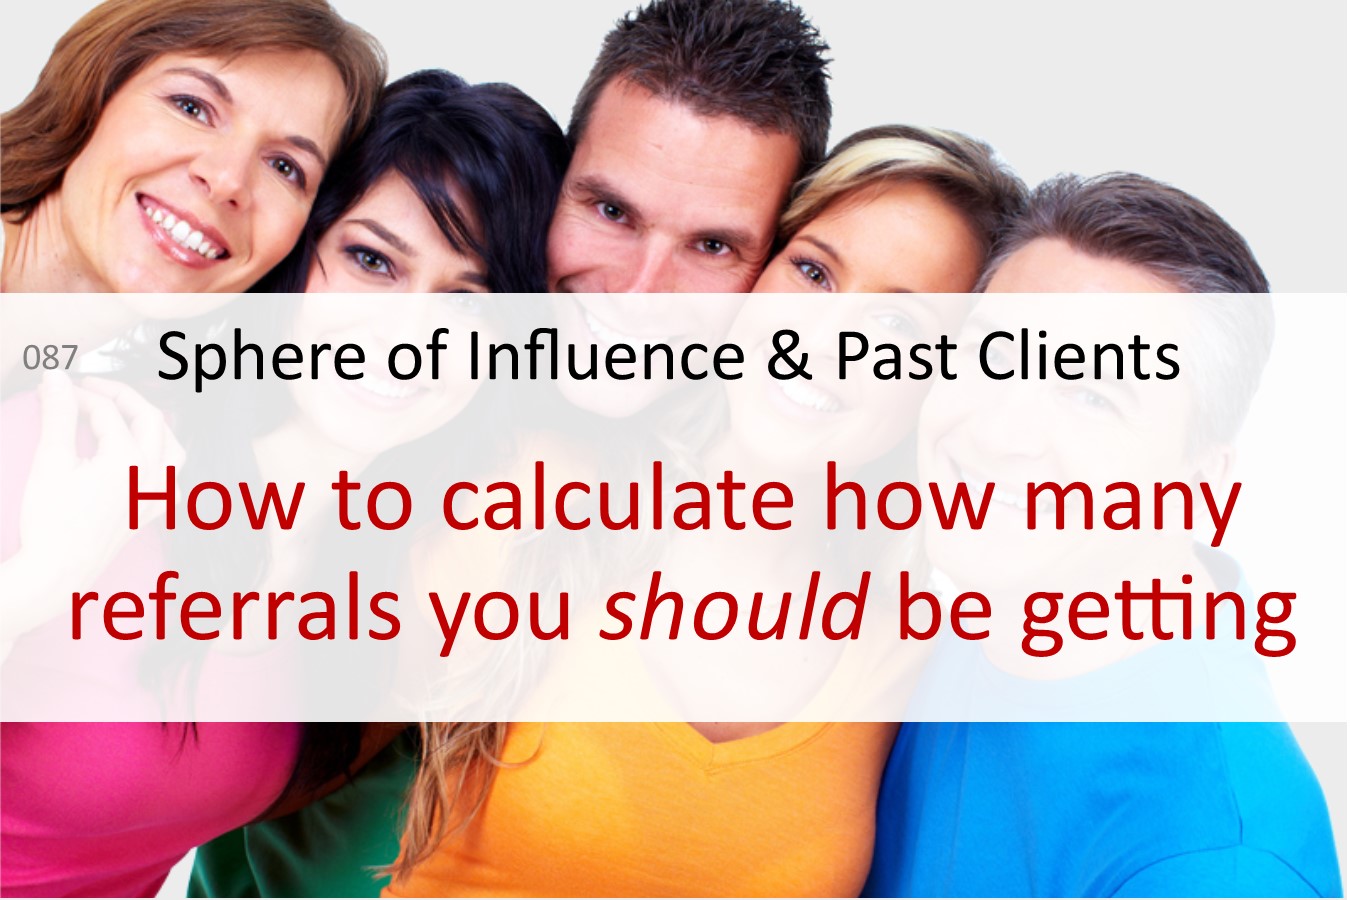 sphere of influence past clients 33 touch referrals